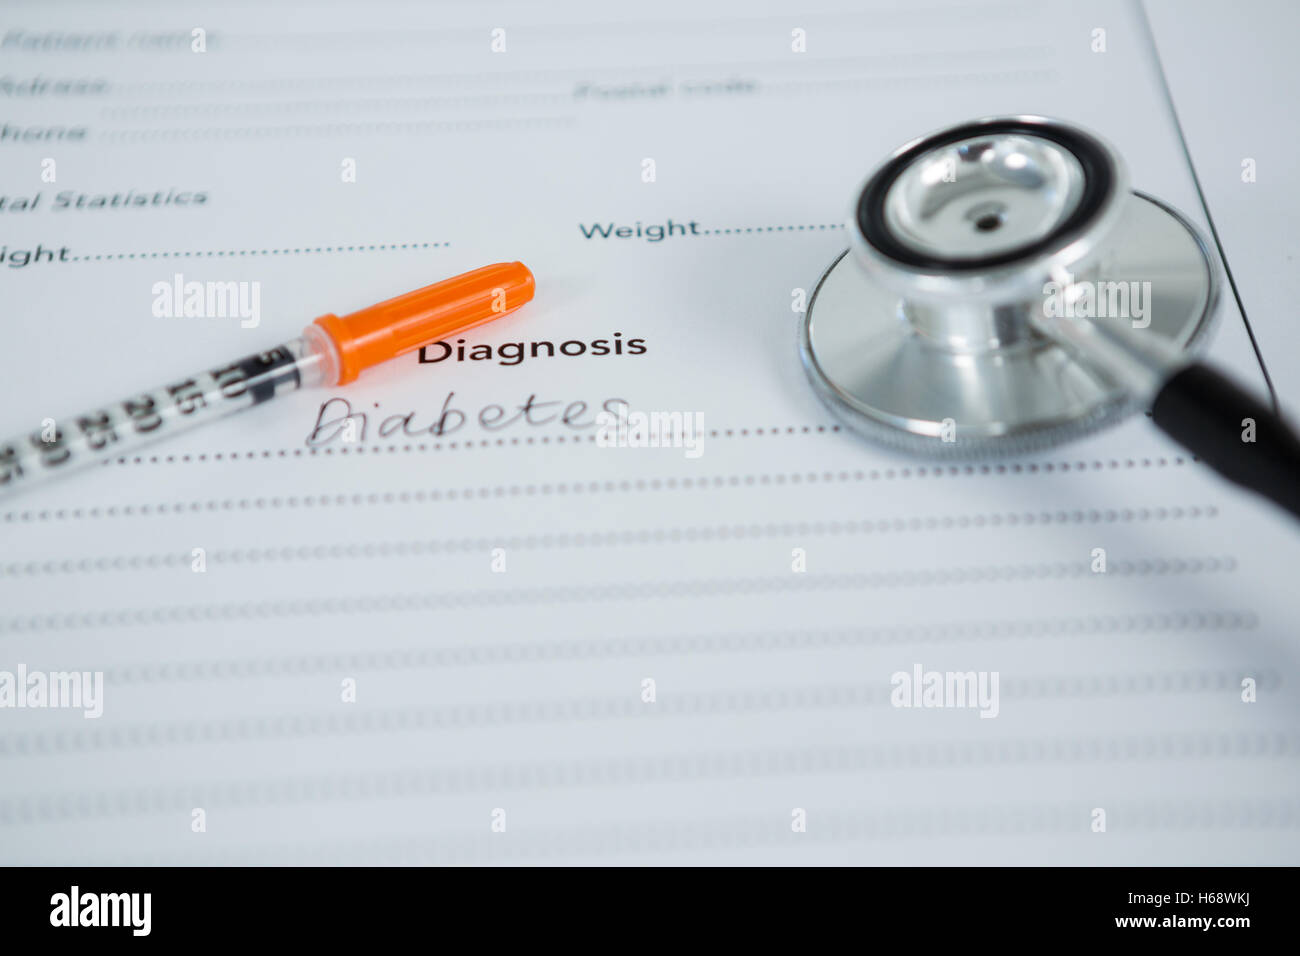 Close-up of injection with diabetes diagnosis and stethoscope Stock Photo